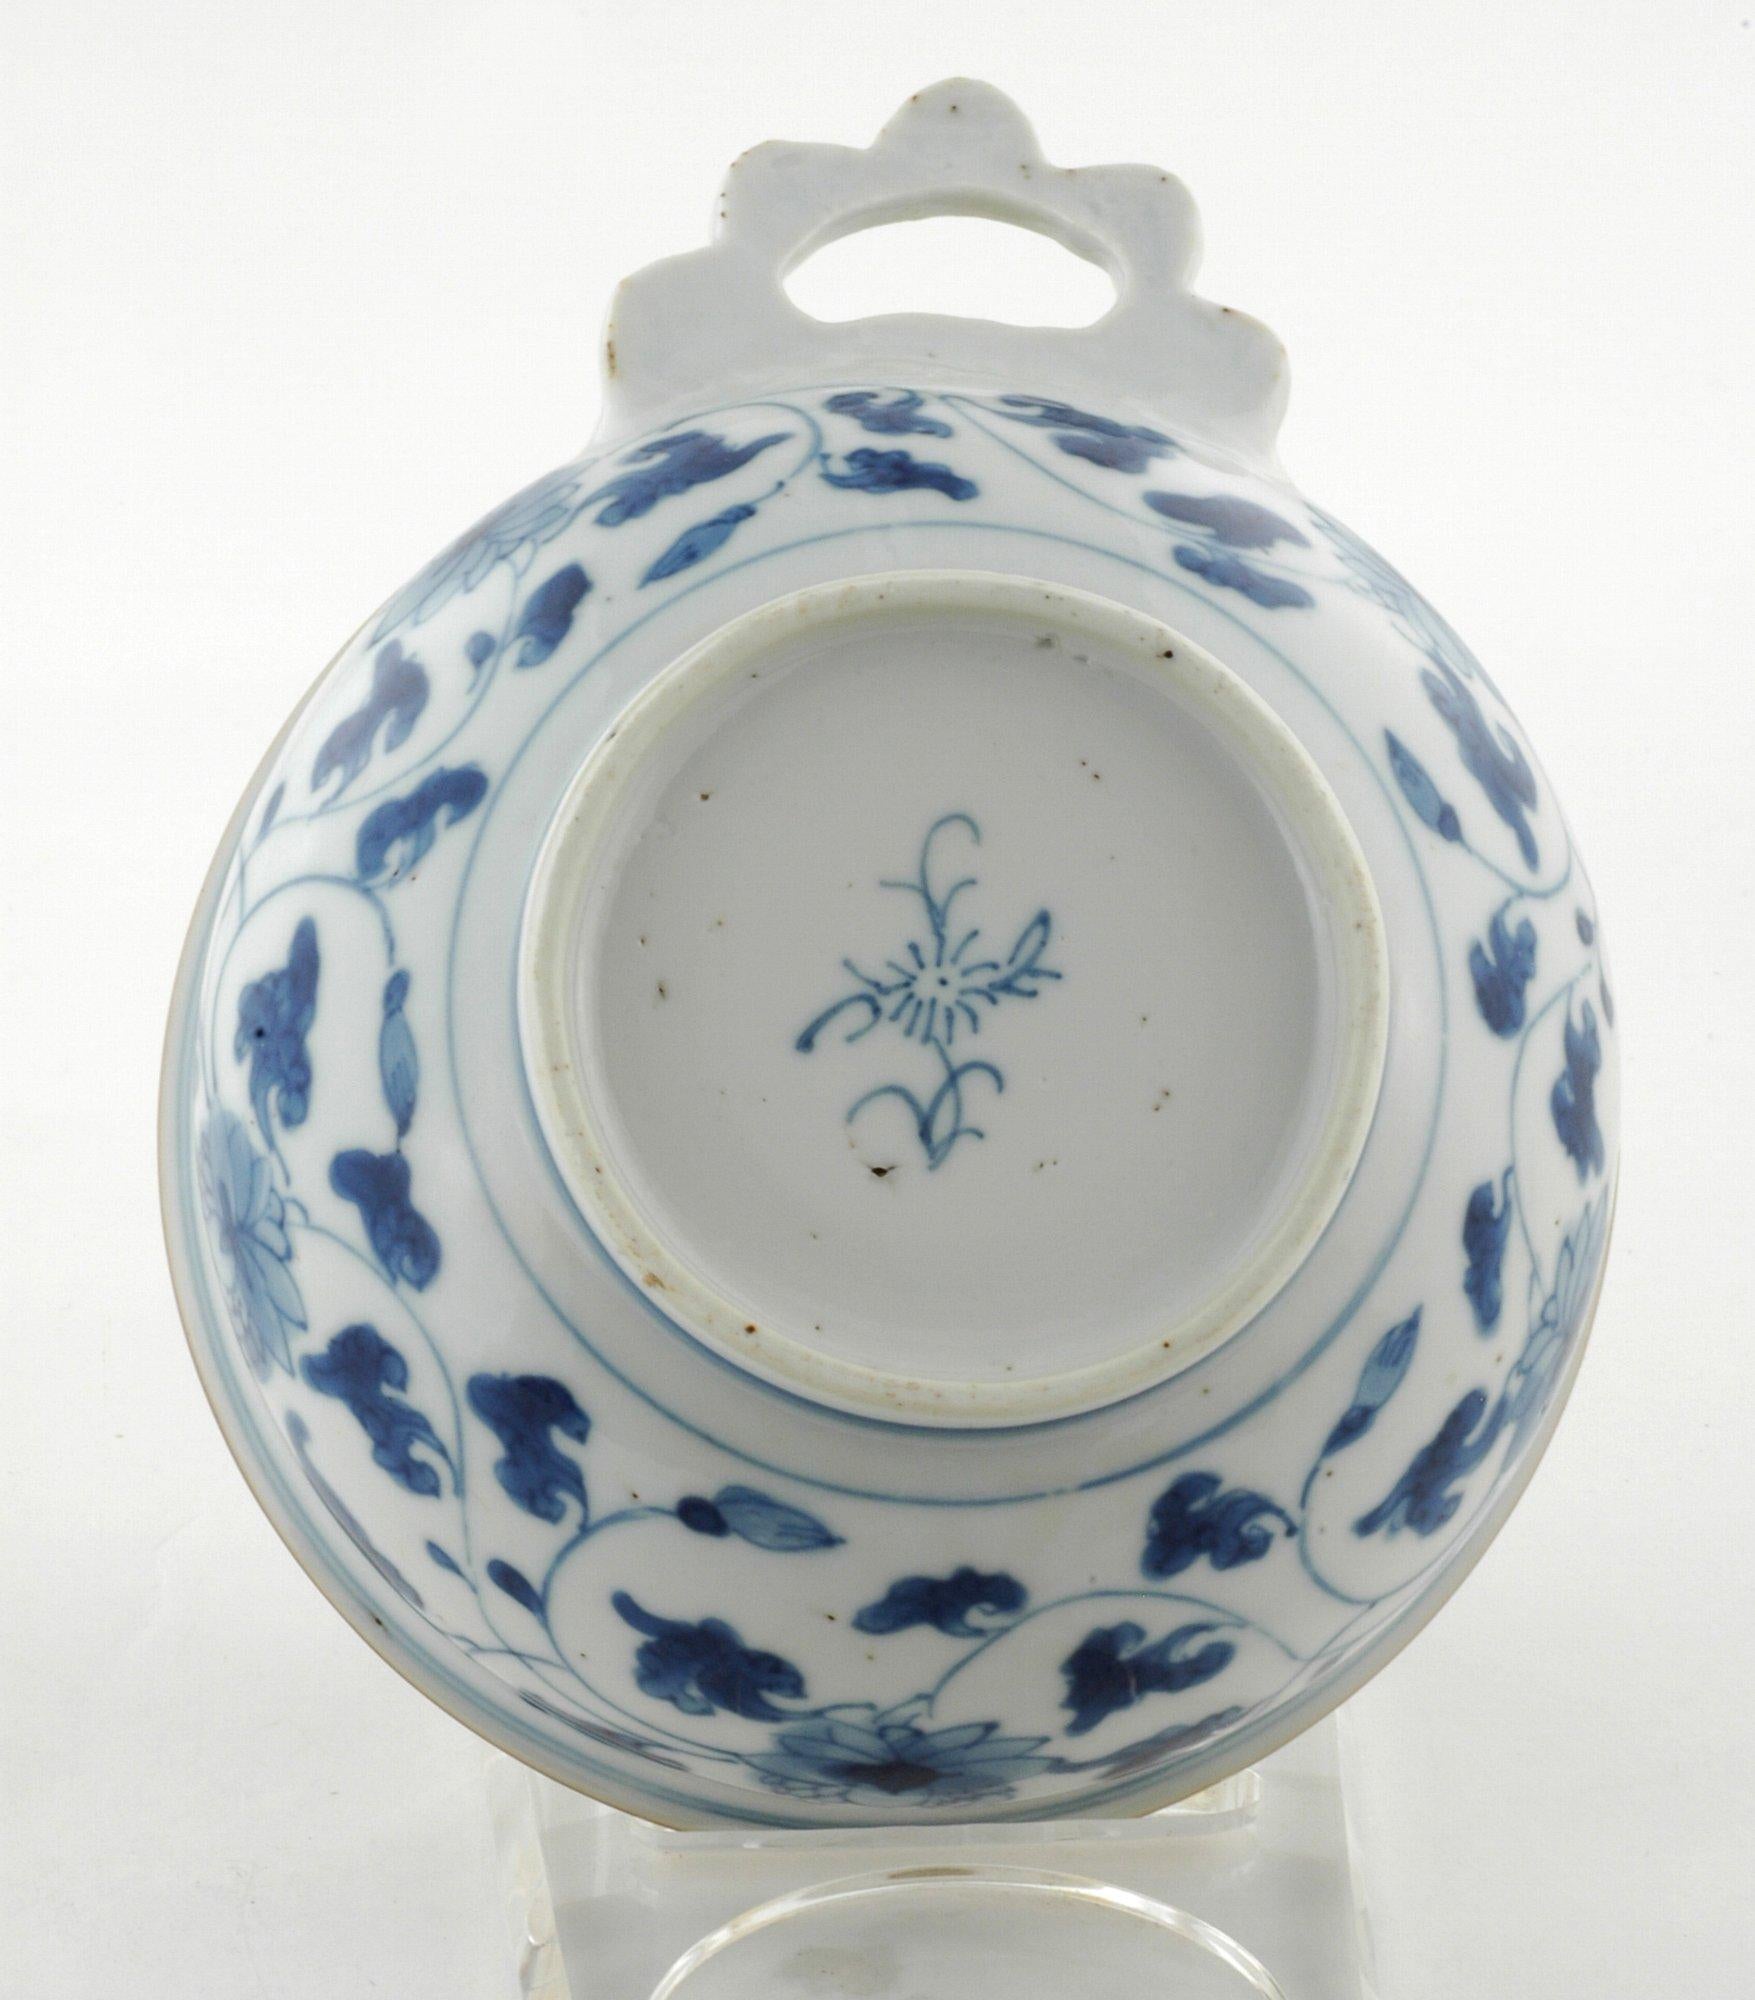 Of typical form after English pottery and metal examples. A good quality underglaze blue and white piece. Marked to the base.
Chinese for the English market Kangxi, circa 1690.